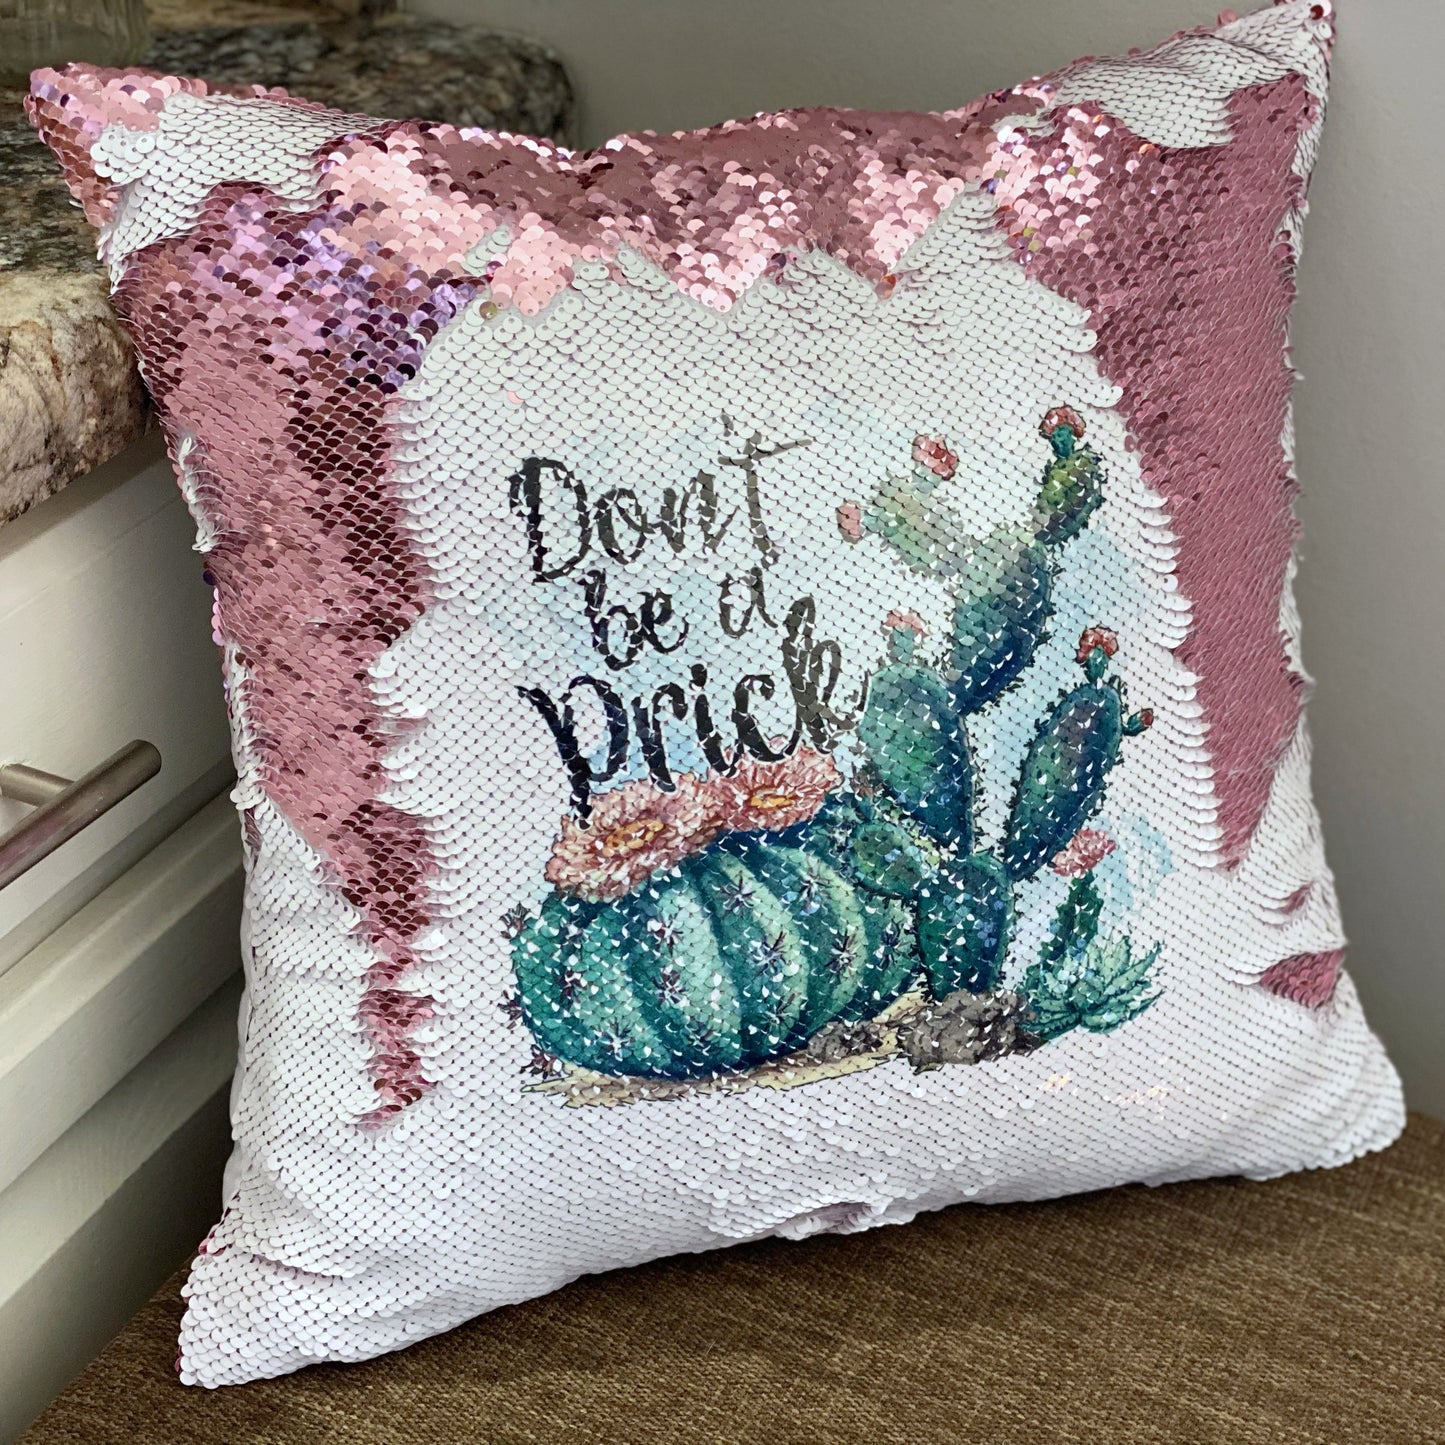 Don’t be a prick Printed Sequin Throw Pillow Covers (Qty 1)